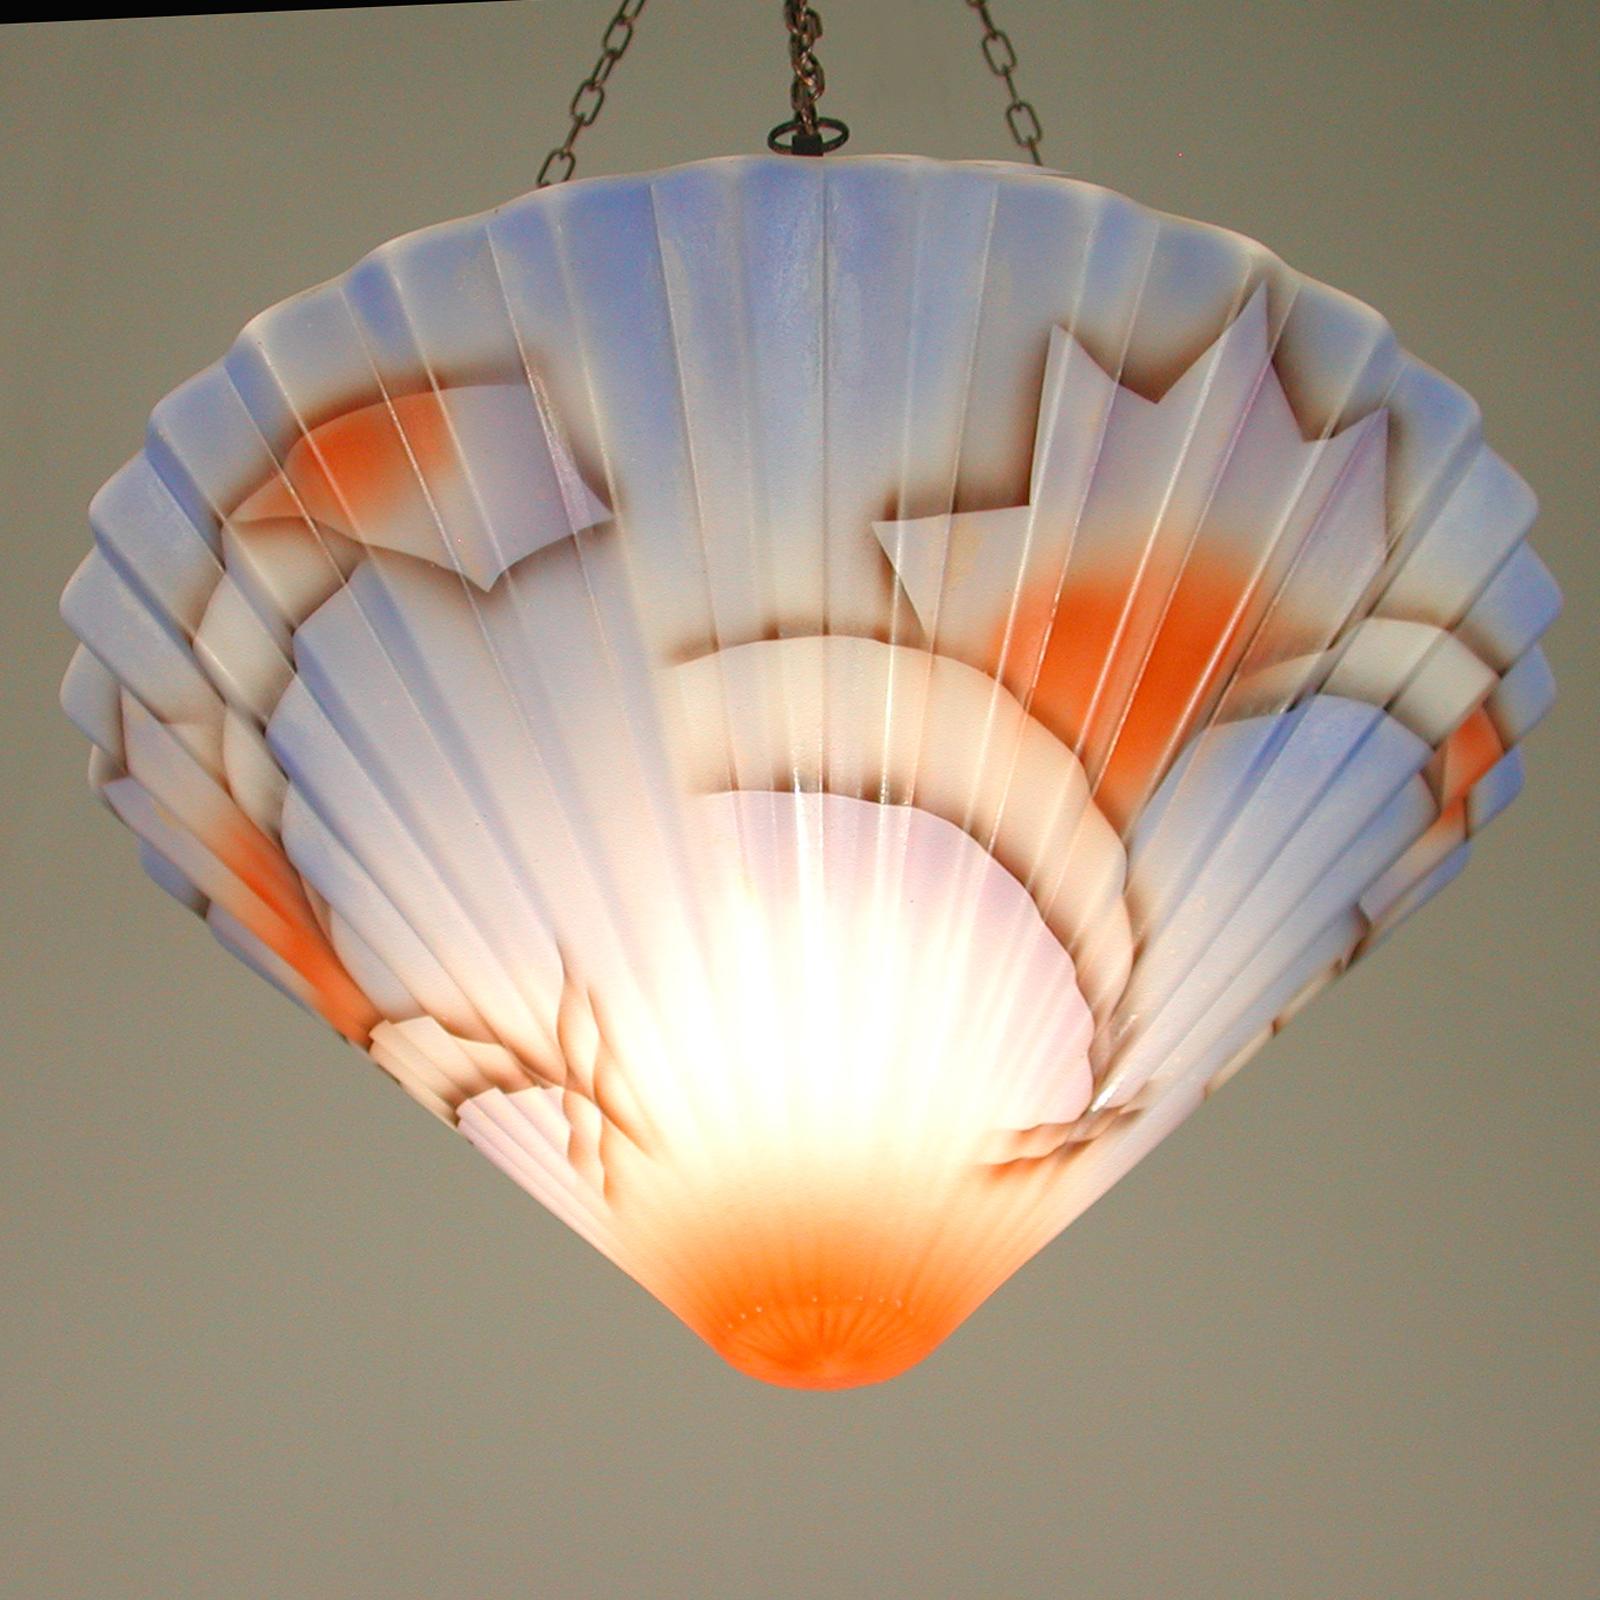 Art Deco Suspension Light, Enameled Glass and Bronzed Brass, Germany 1930s For Sale 9